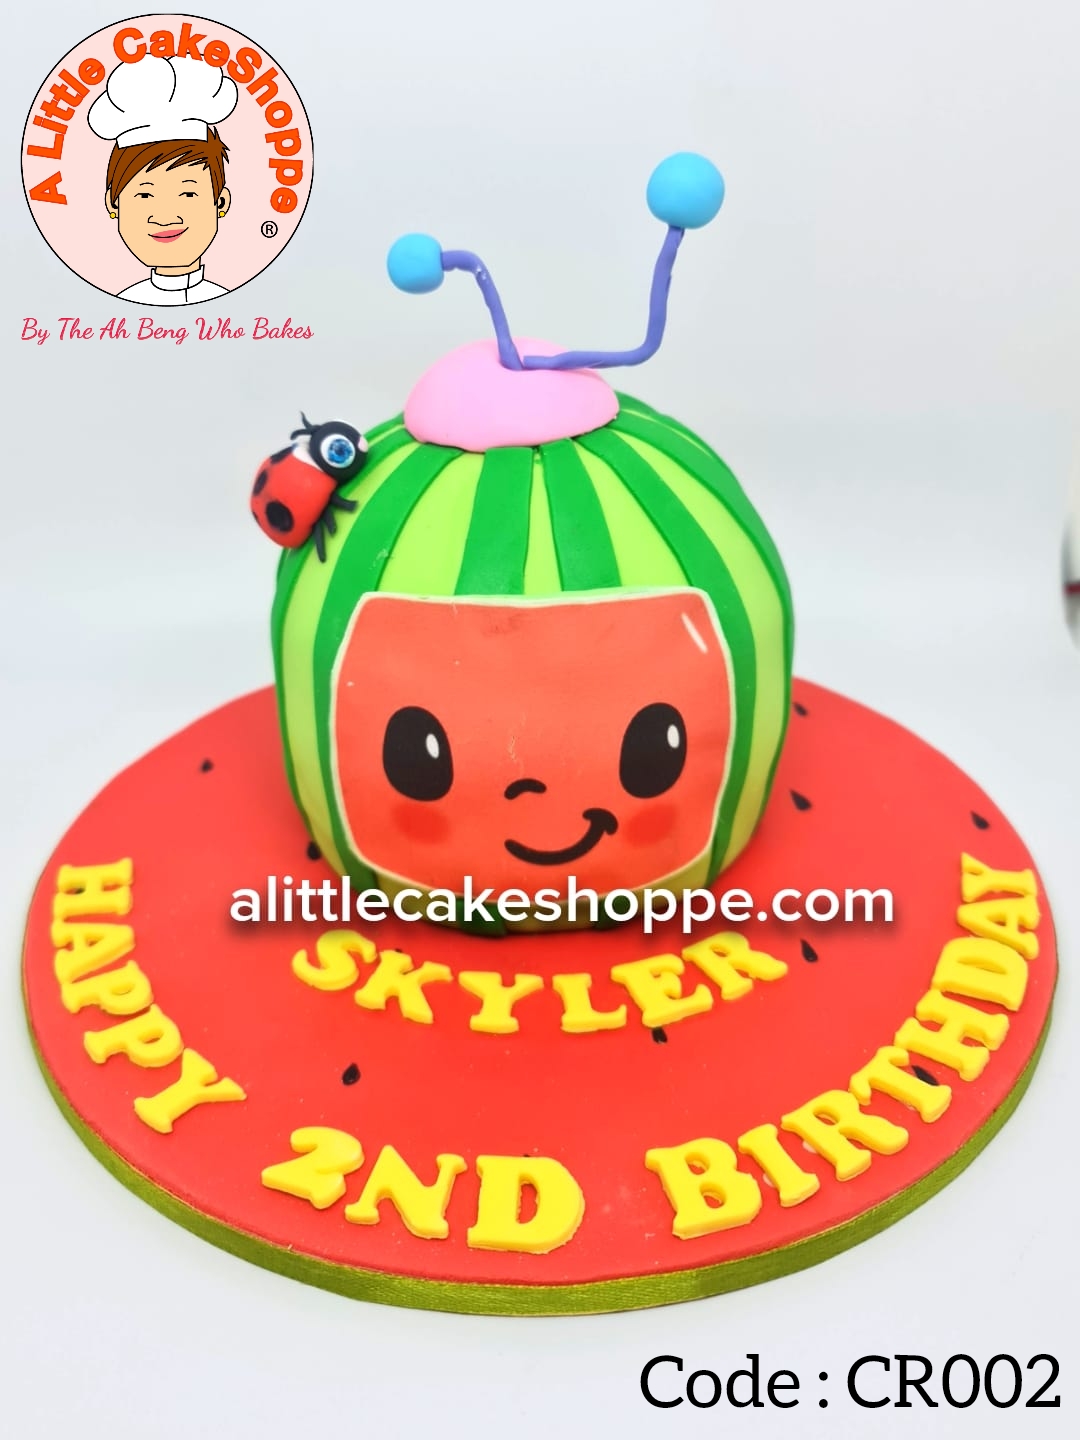 Best Cake Shop Singapore Delivery Best Customised Cake Shop Singapore customise cake custom cake 2D 3D birthday cake cupcakes desserts wedding corporate events anniversary 1st birthday 21st birthday fondant fresh cream buttercream cakes alittlecakeshoppe a little cake shoppe compliments review singapore bakers SG cake shop cakeshop ah beng who bakes sgbakes novelty cakes sgcakes licensed sfa nea cake delivery celebration cakes kids birthday cake surprise cake adult children parenting cocomelon cake